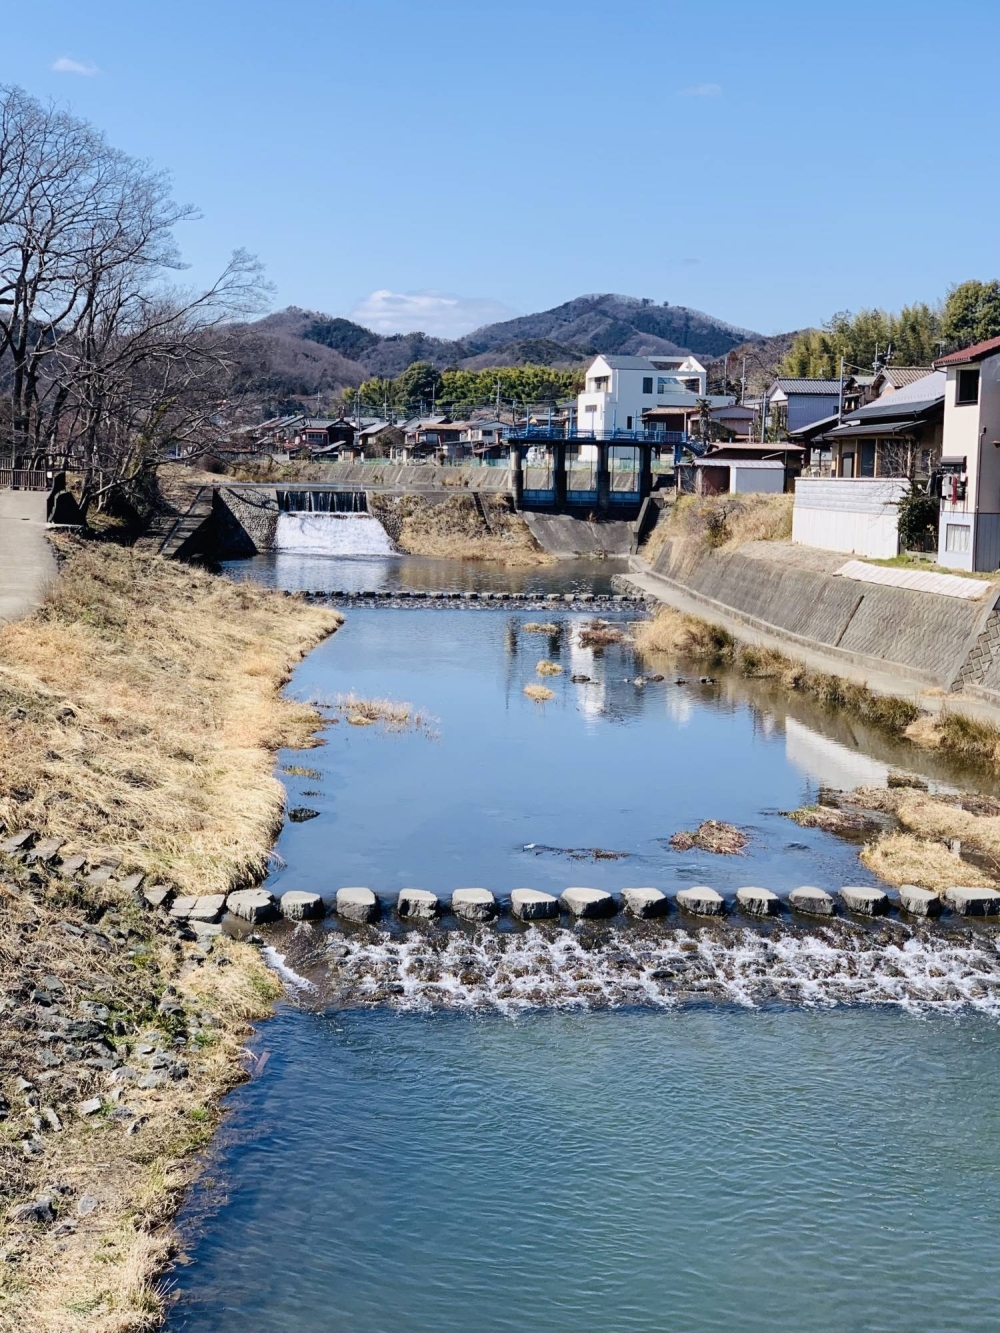 The Tsukigawa river in Ogawa, Saitama Prefecture. The town's approach to sustainable travel — both in terms of the numbers of tourists and their environmental impact — could make it a model for other places across the country.